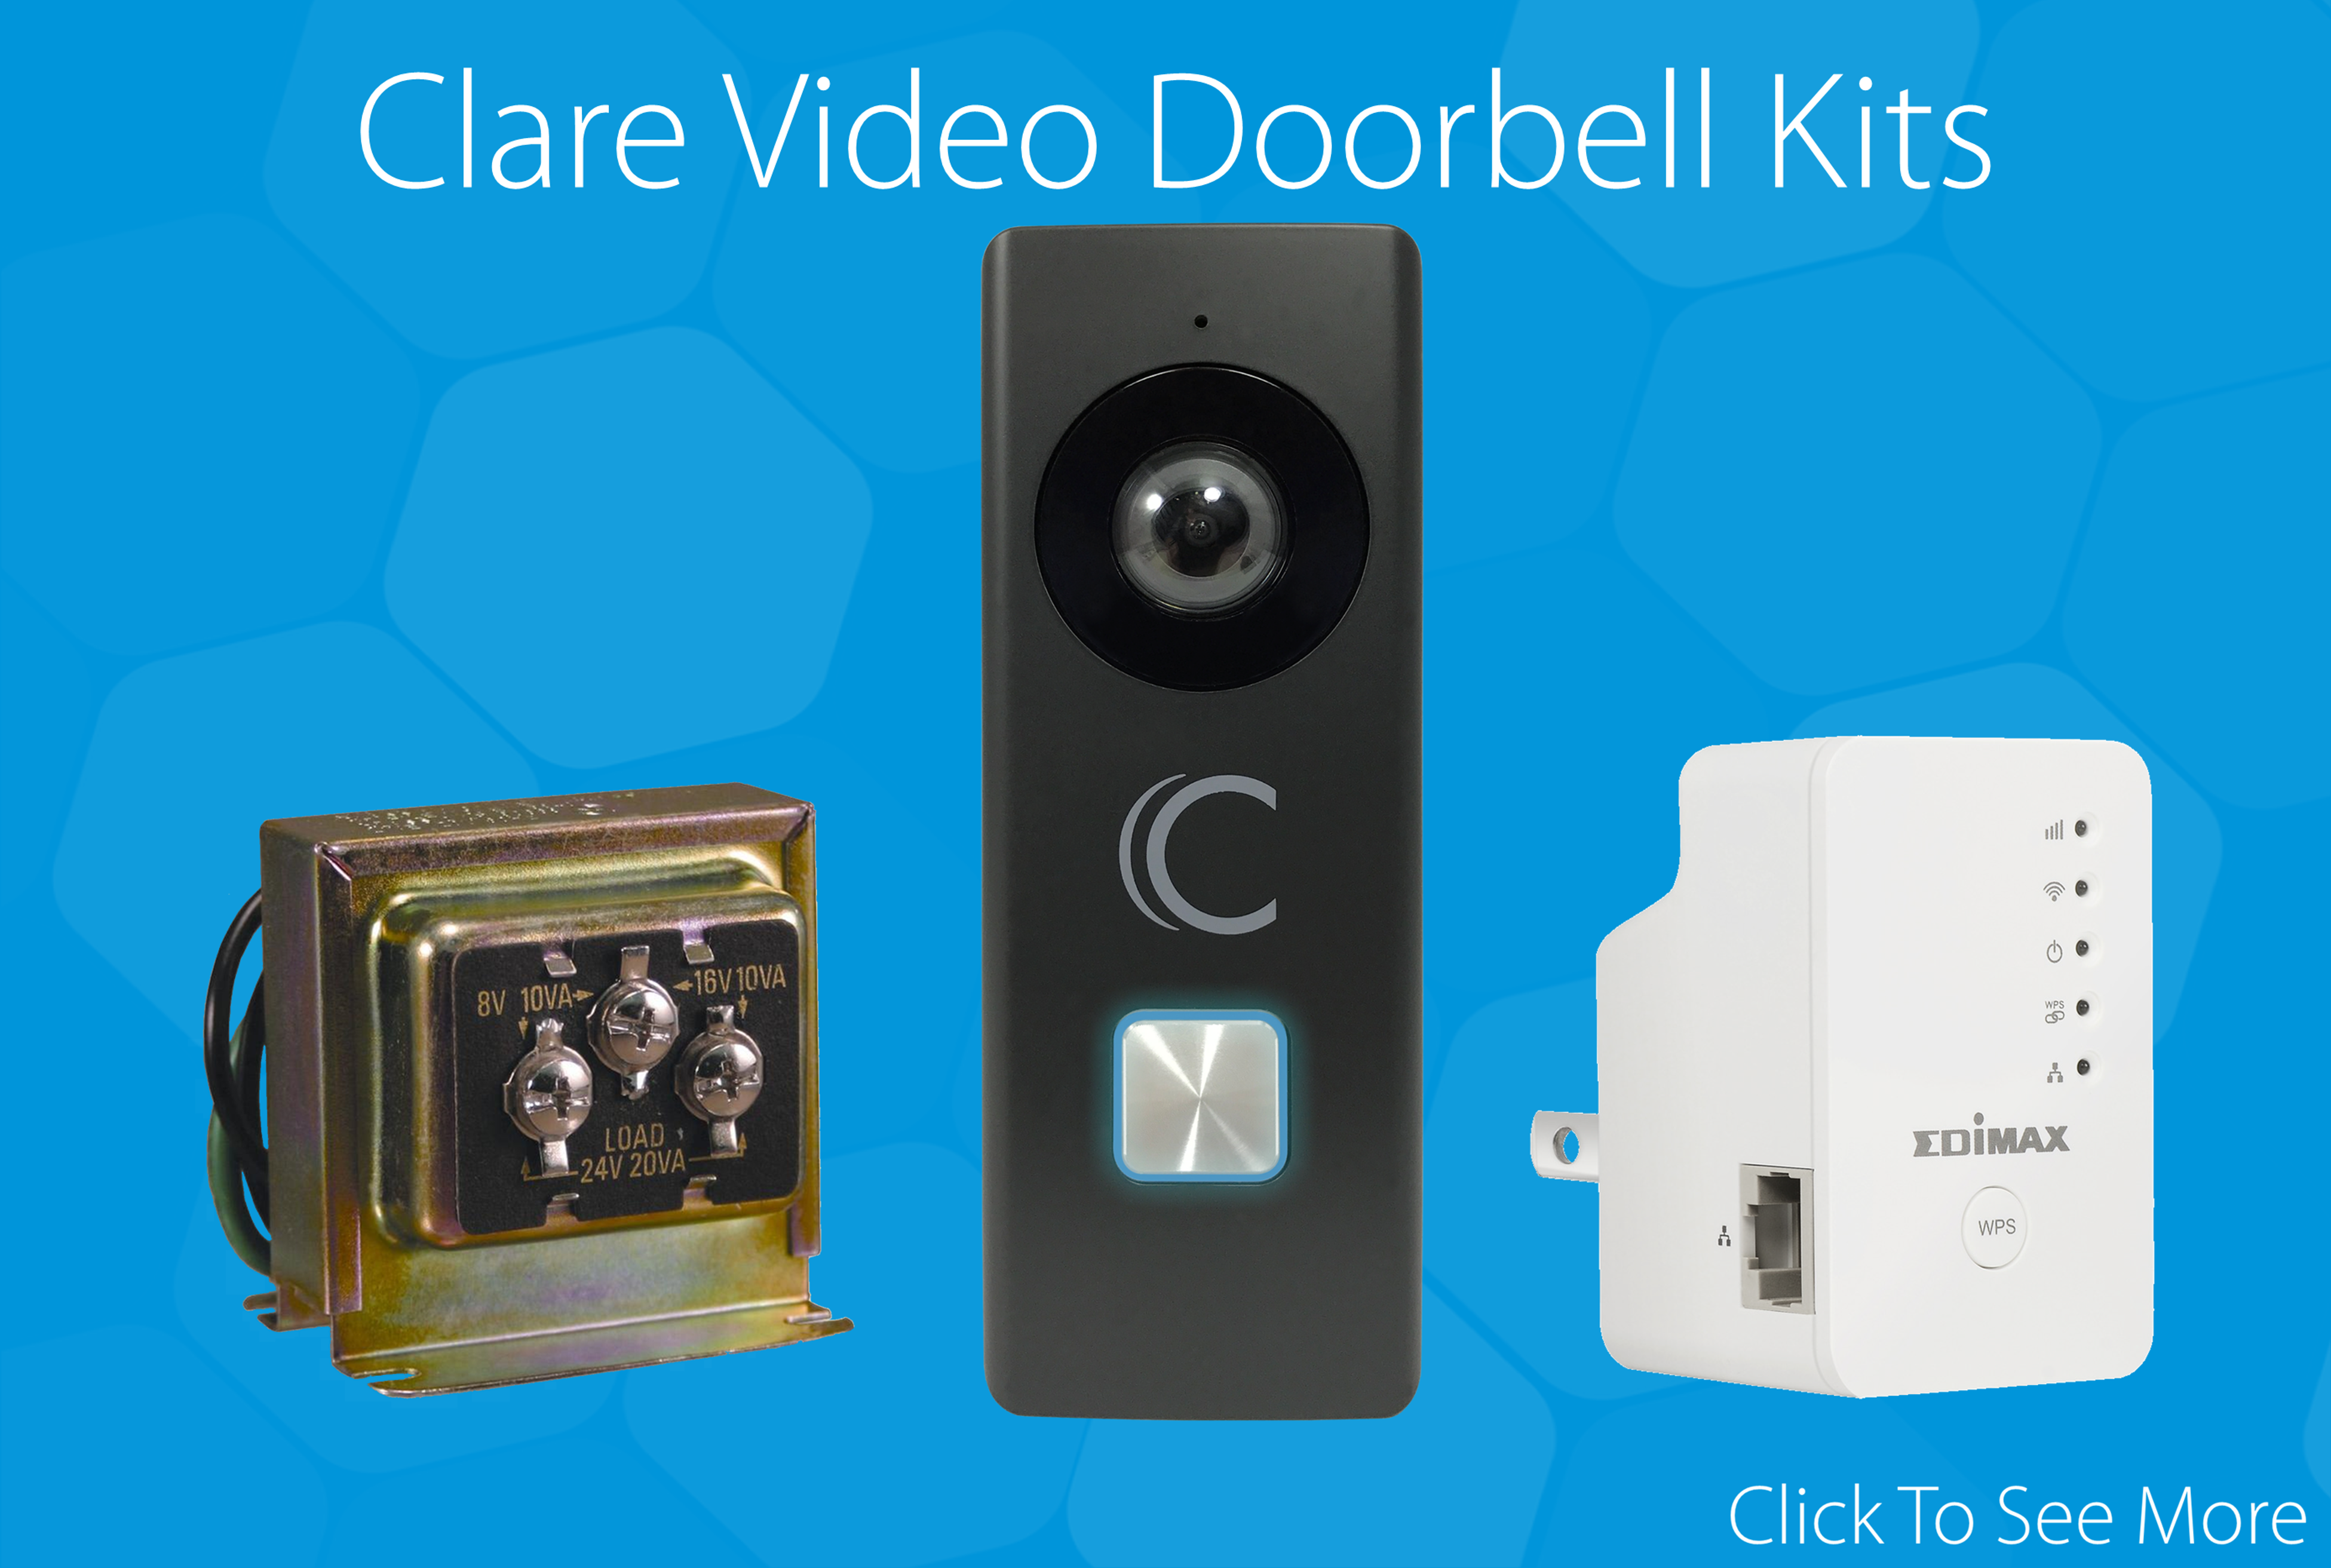 Now Available: Clare Video Doorbell Kits